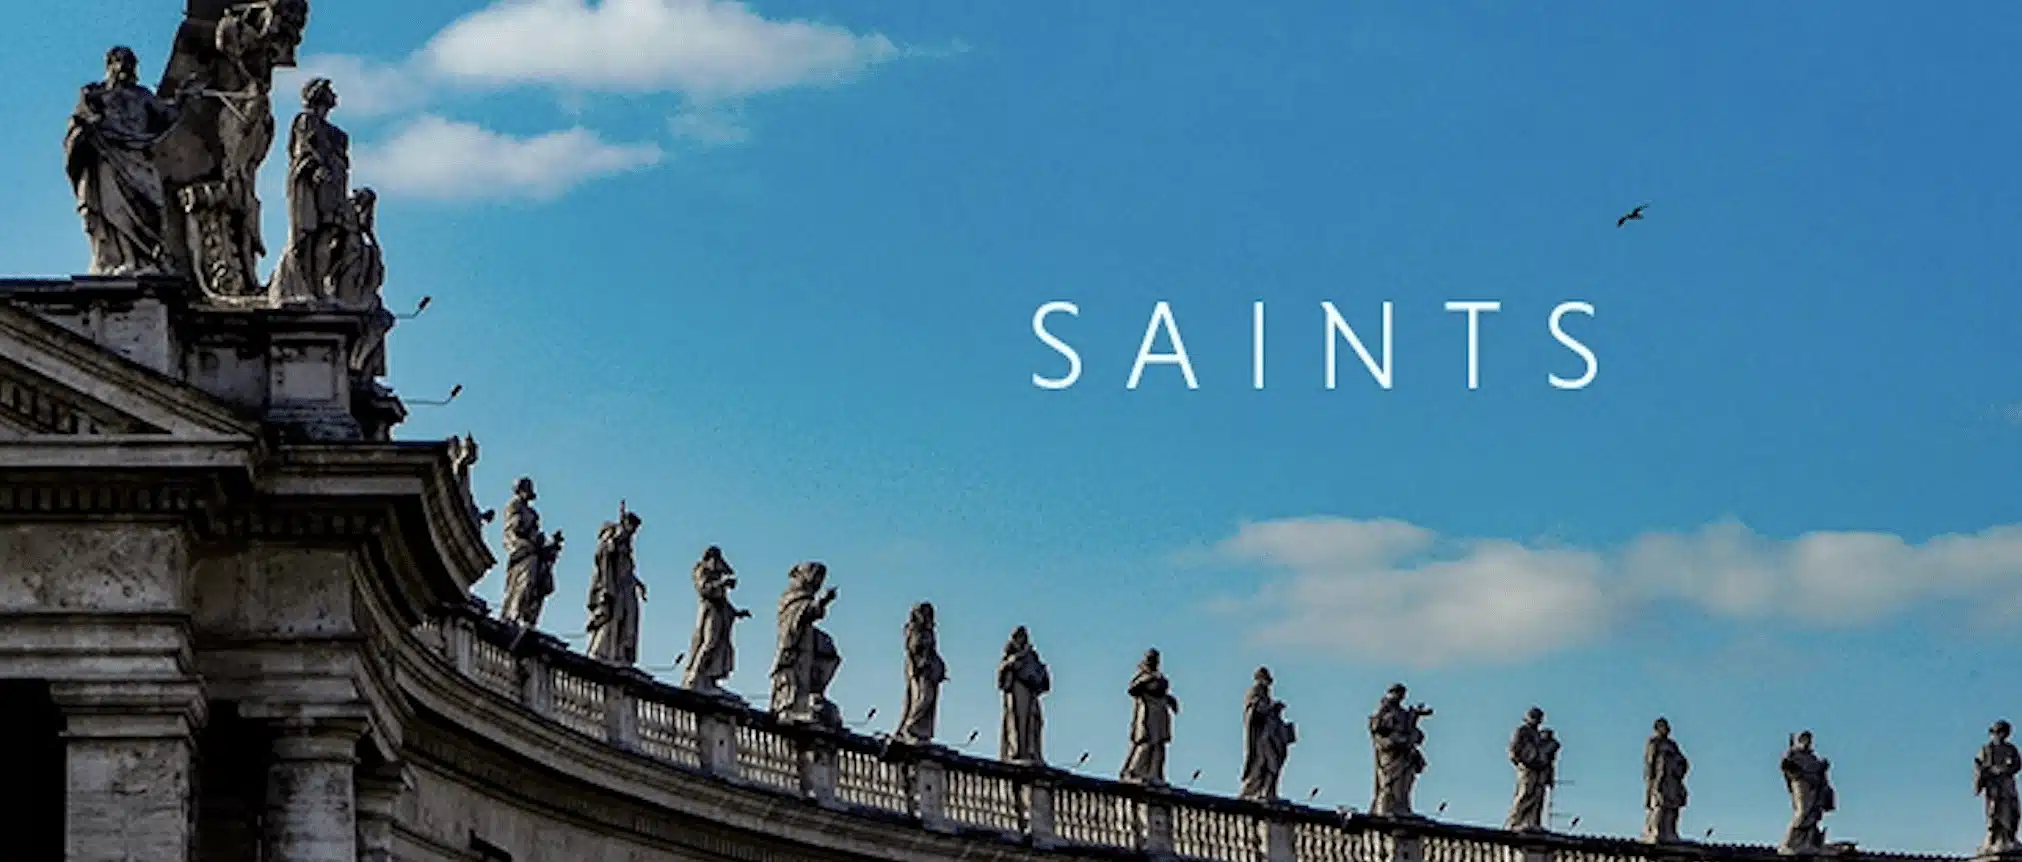 Saints atop St. Peter's in Rome